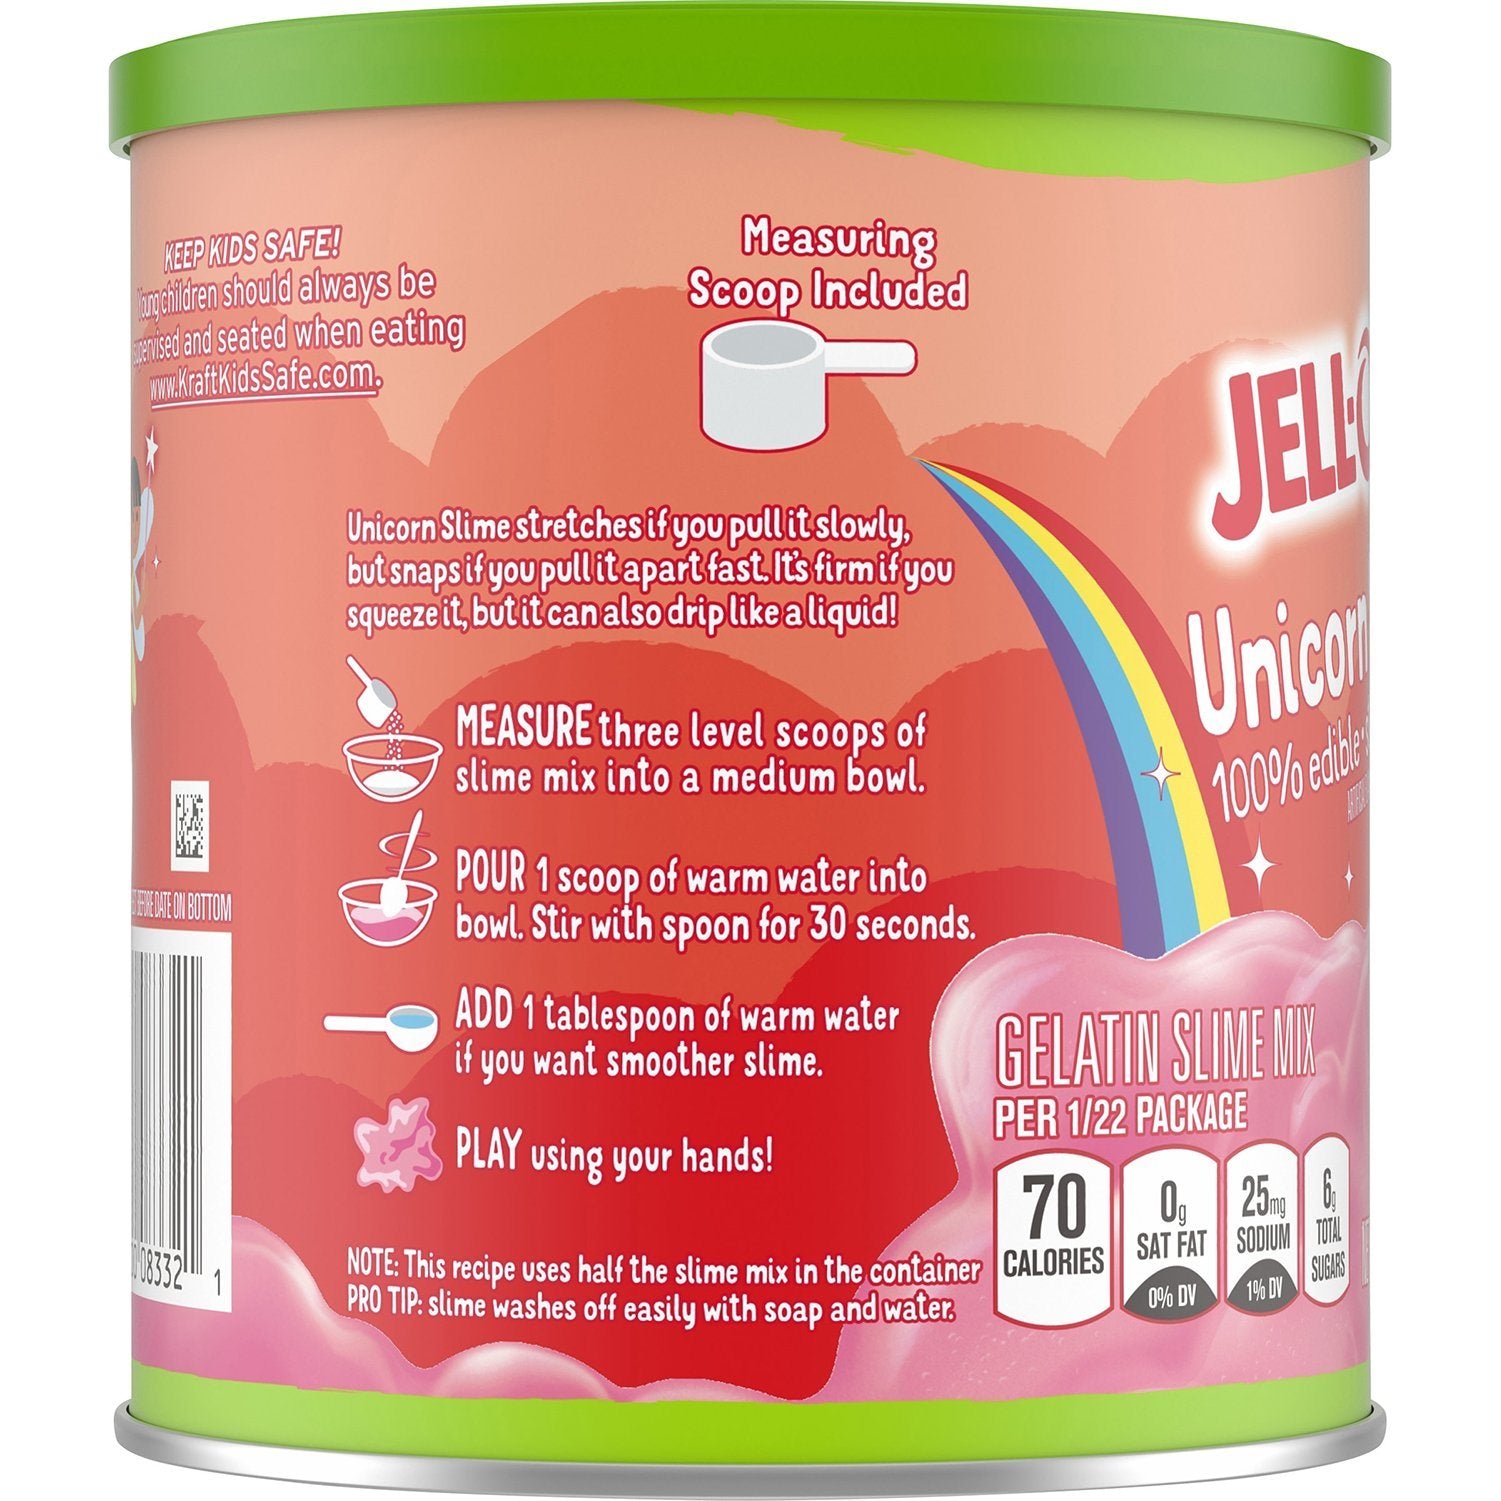 Jell-O Play Instant Dessert Mix Jell-O 